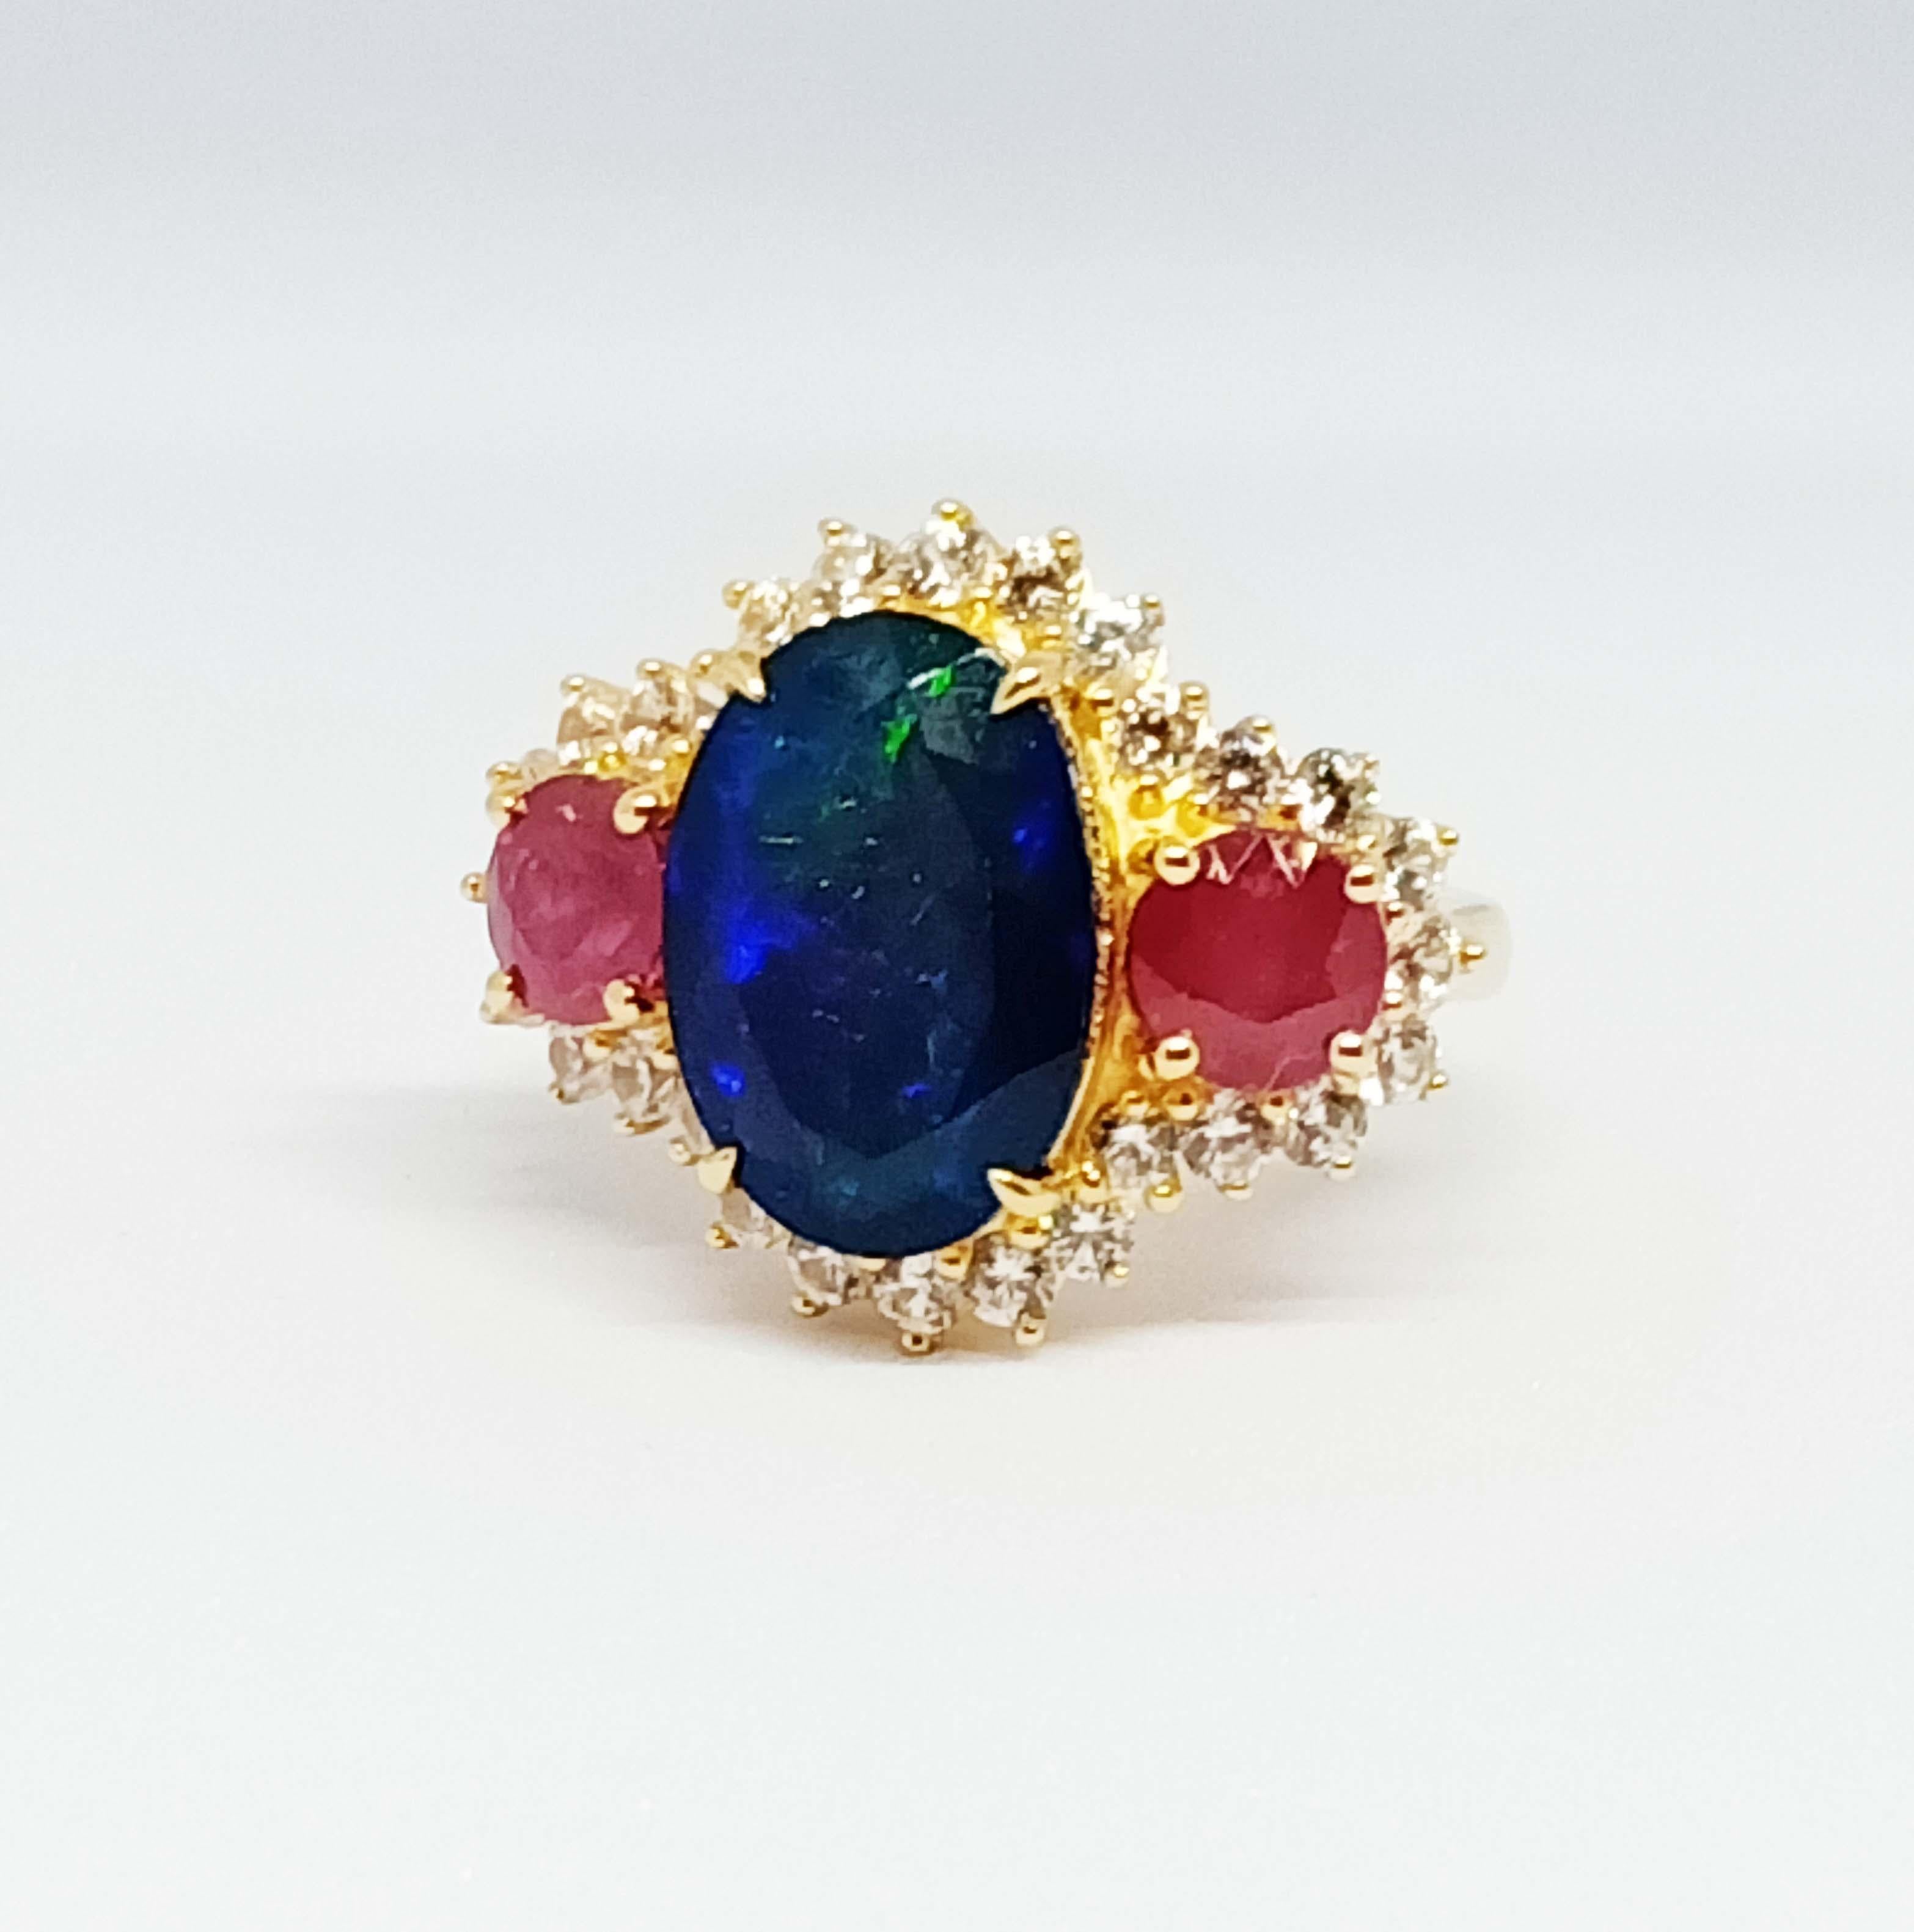 Baroque 7.09 cts. Black Opal Ring. Sterling silver on 18K Gold Plated For Sale